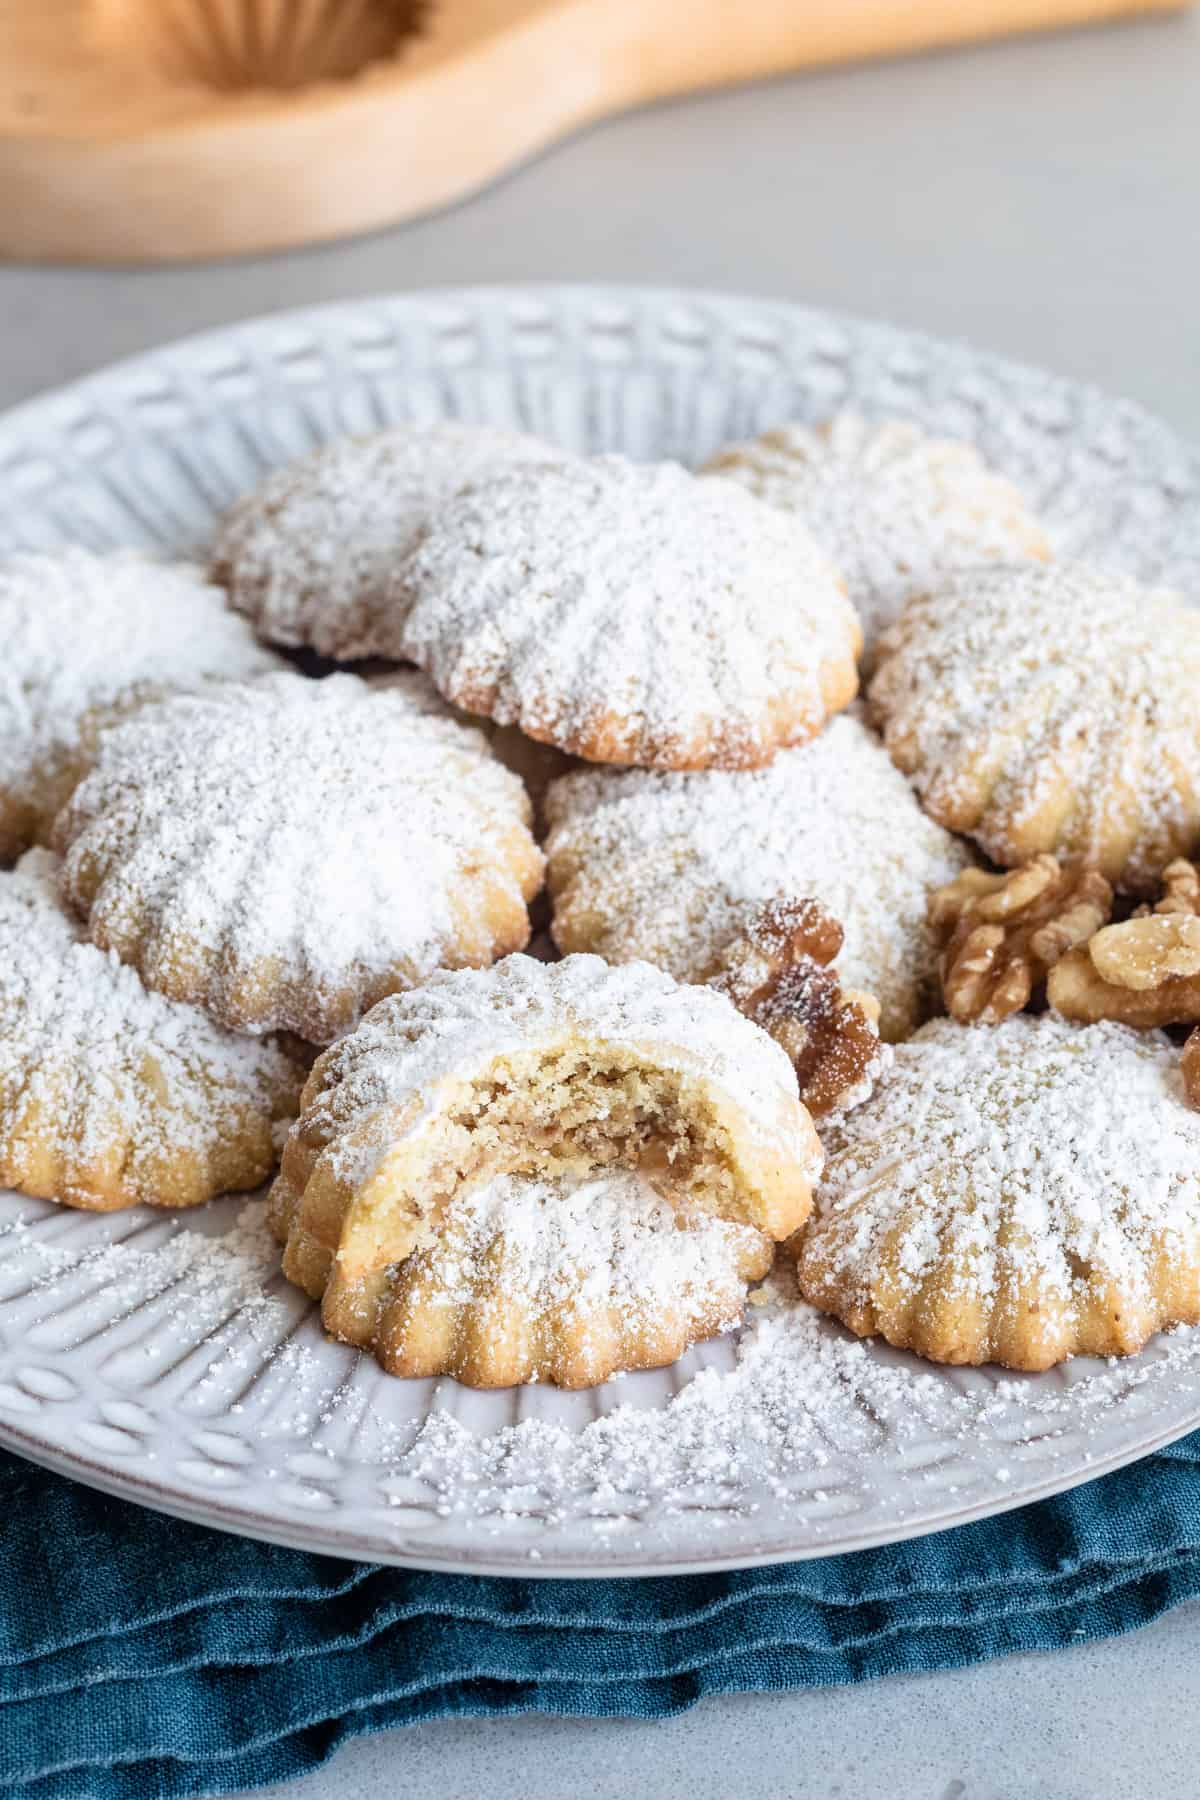 Walnut filled maamoul cookies on a plate dusted heavily with powdered sugar with cookie press nearby.